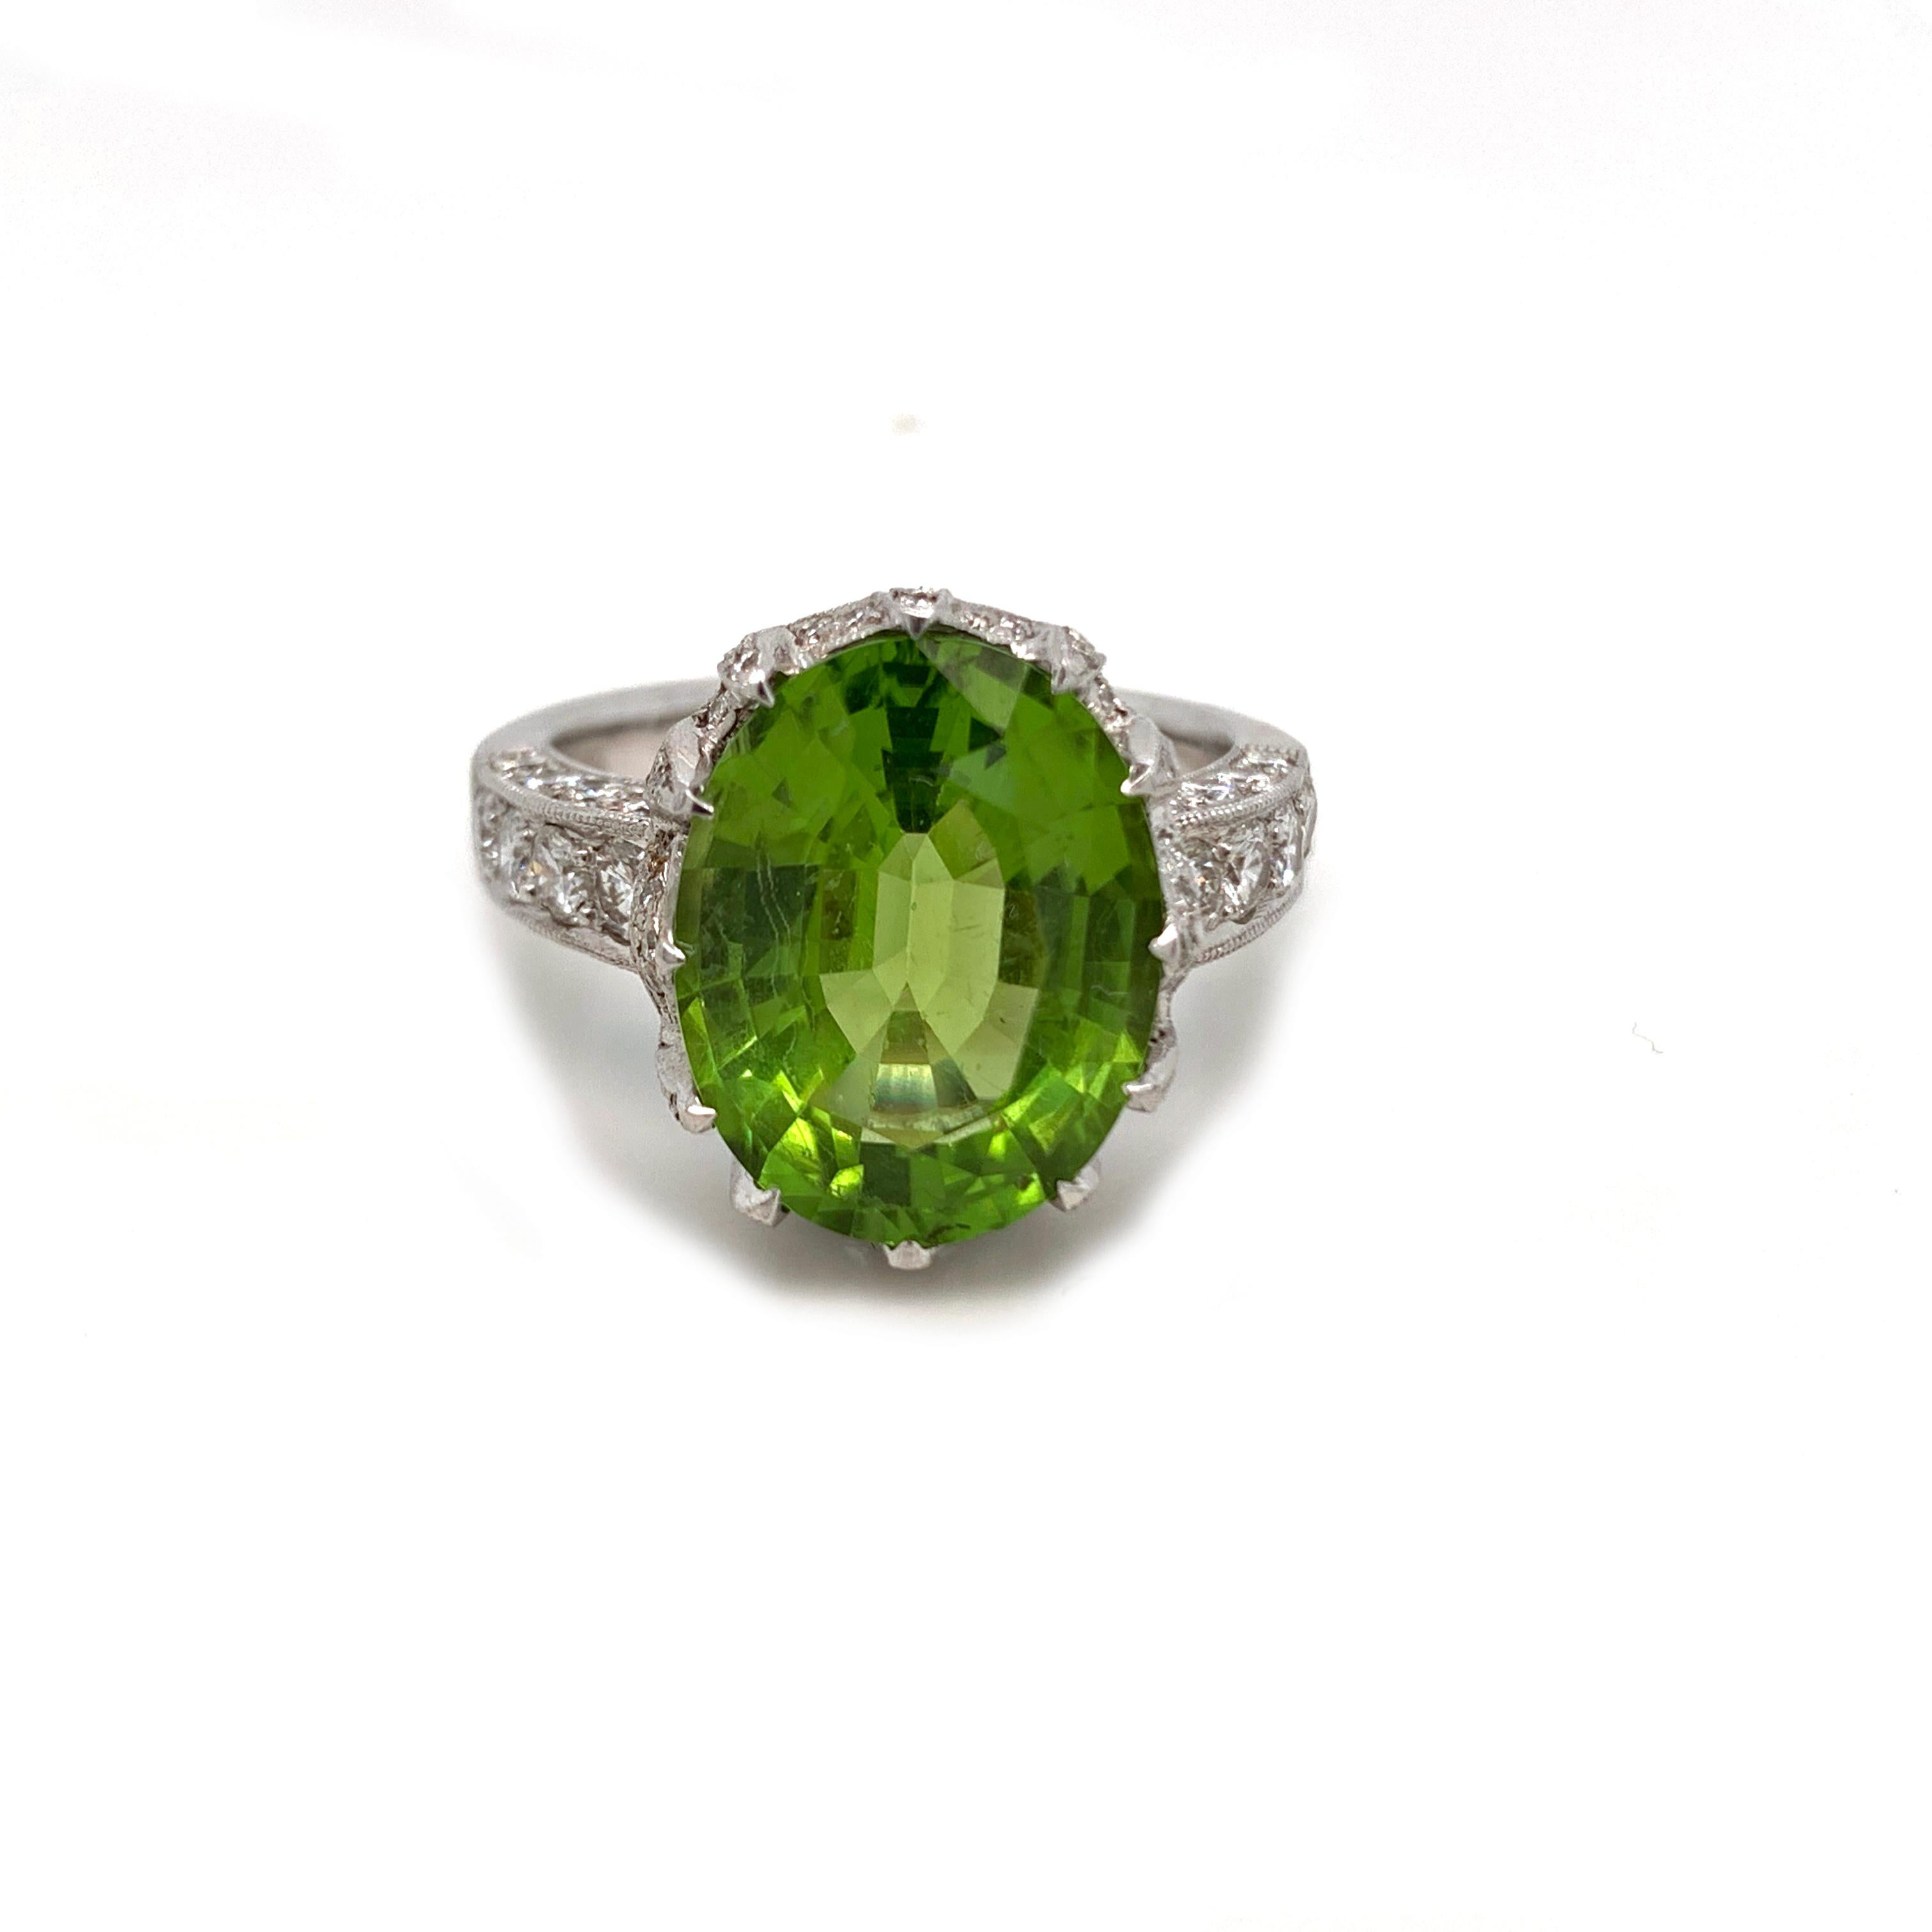 From, the 1970's this beautiful 18kt white gold peridot and diamond ring. This beautiful ring is a US ring size 7.75 and weighs 9.6grams. The, ring is beautiful and feature an approx 6ct peridot. In, excellent codition for a a piece made in the